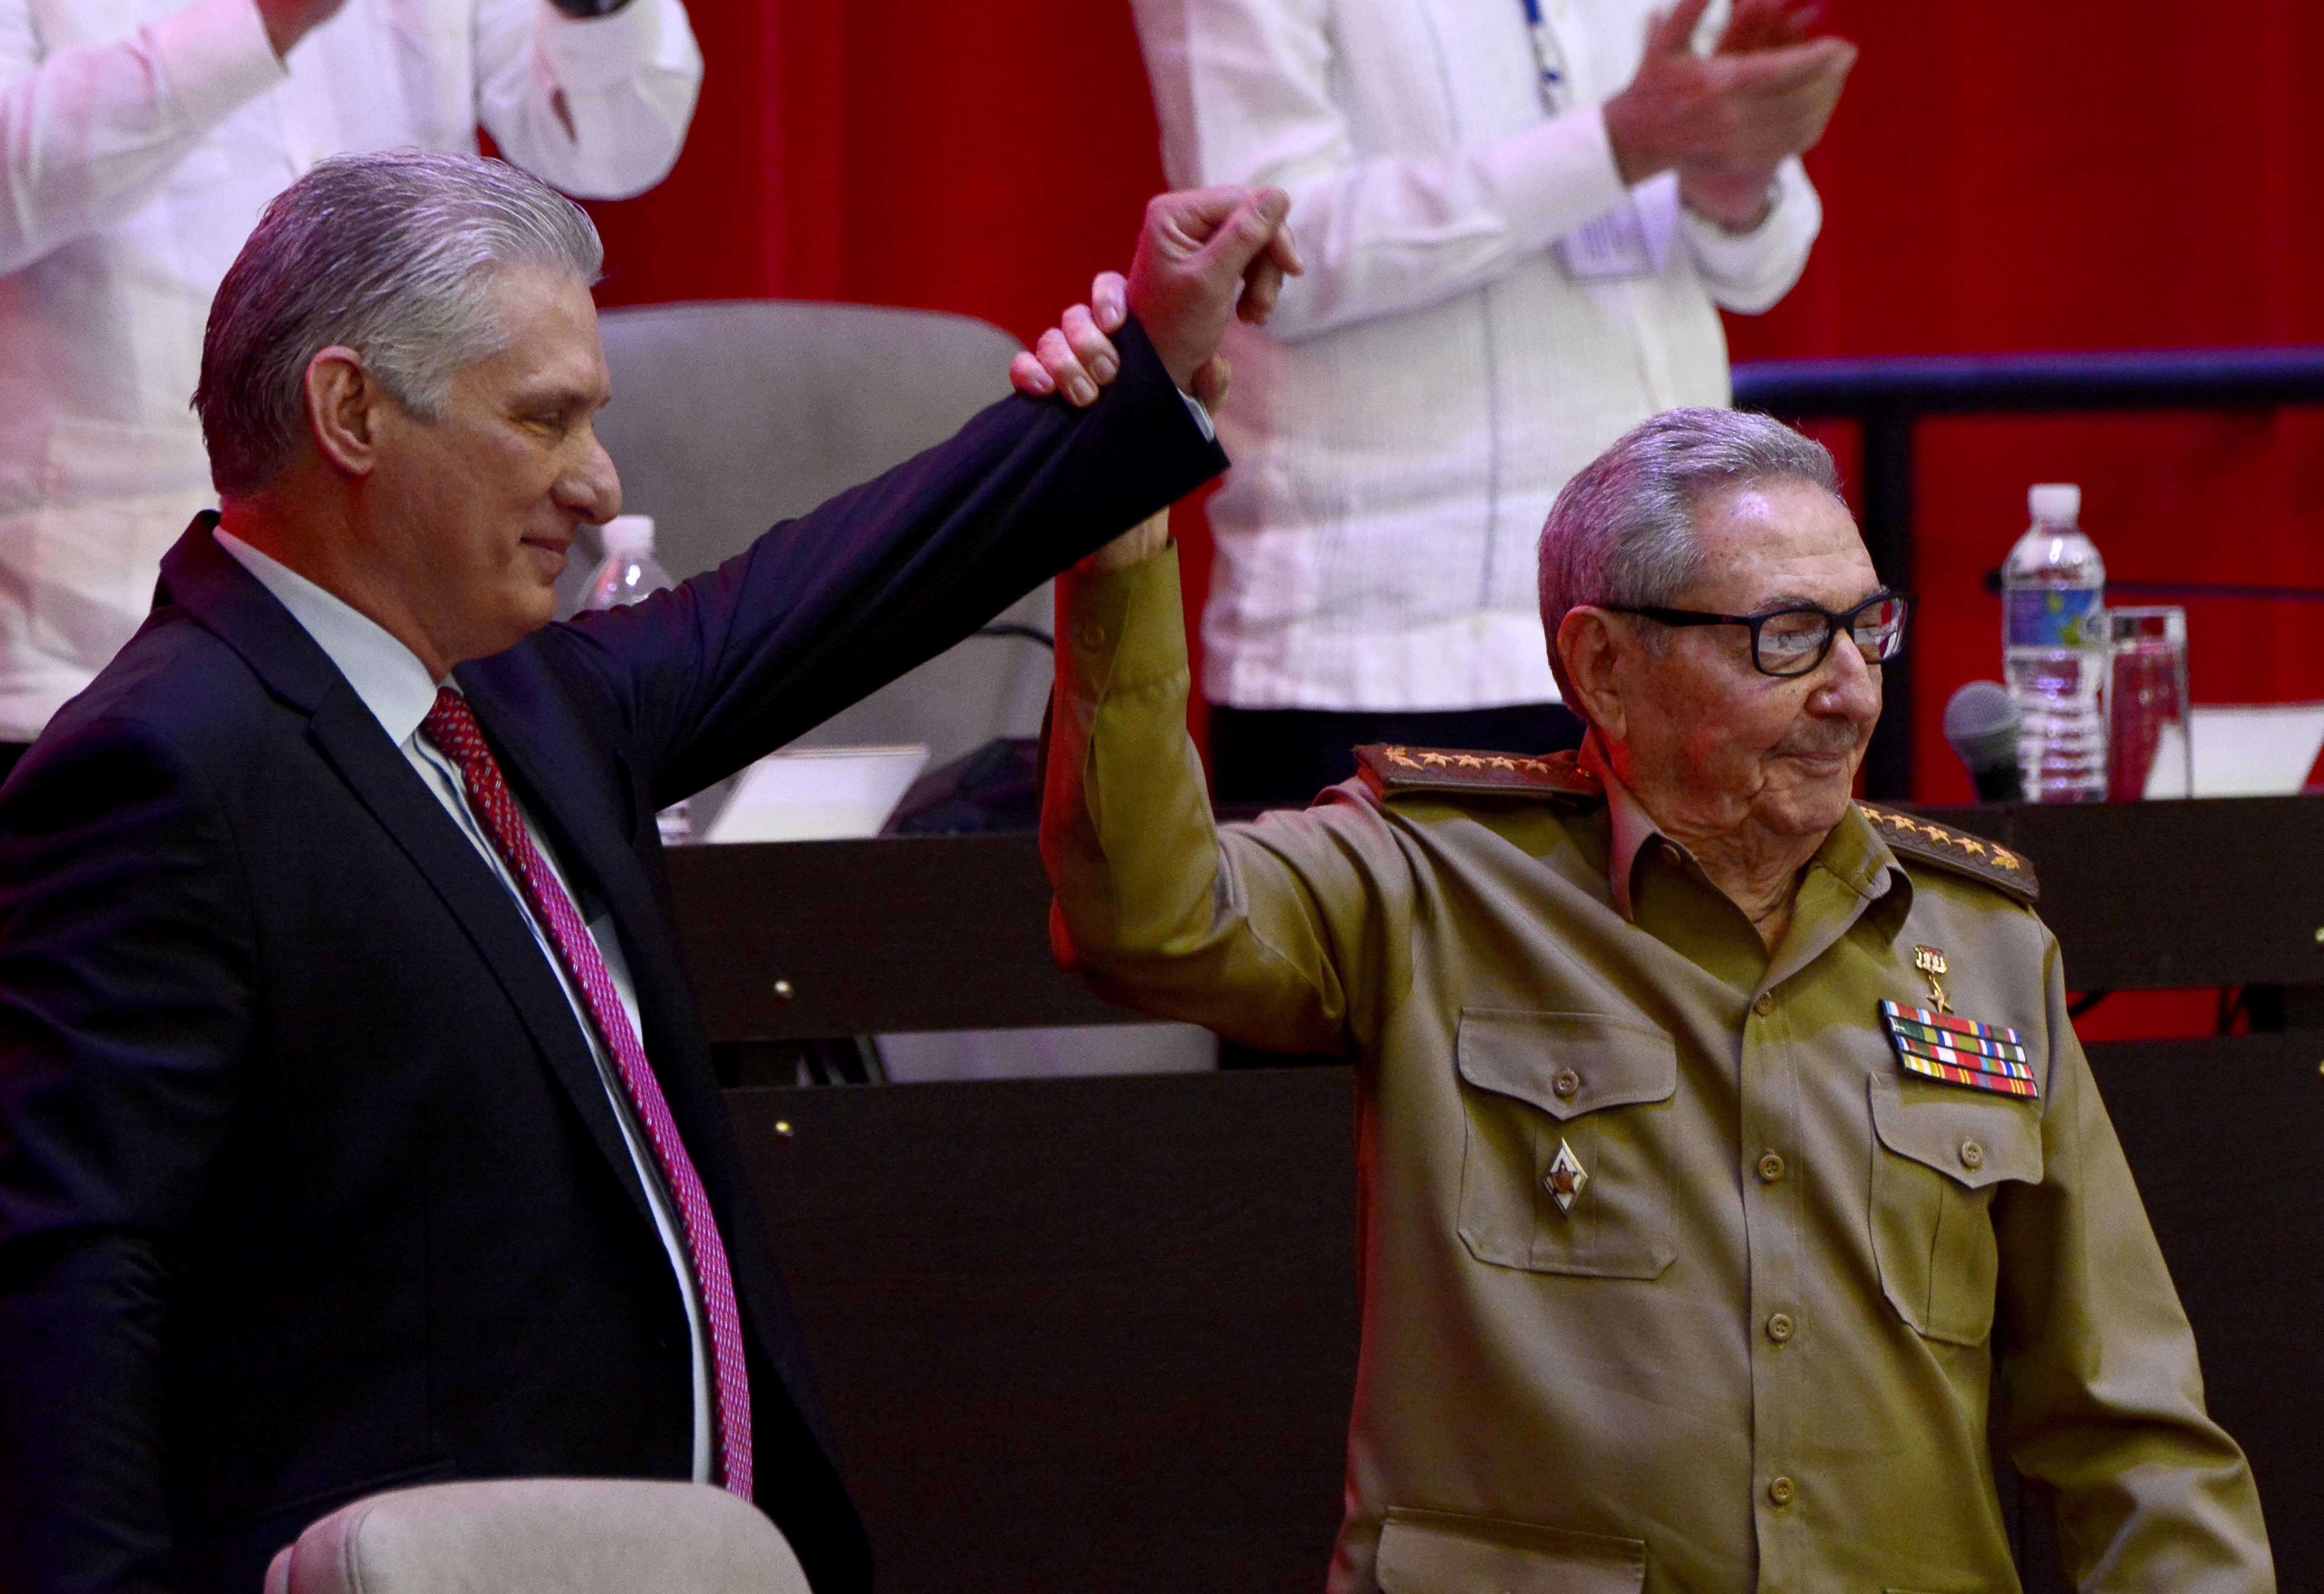 Cuba’s President and newly elected First Secretary of the Communist Party Miguel Diaz-Canel, left, and former Cuban President Raul Castro in Havana, Cuba, on Monday. Photo: ACN via Reuters 